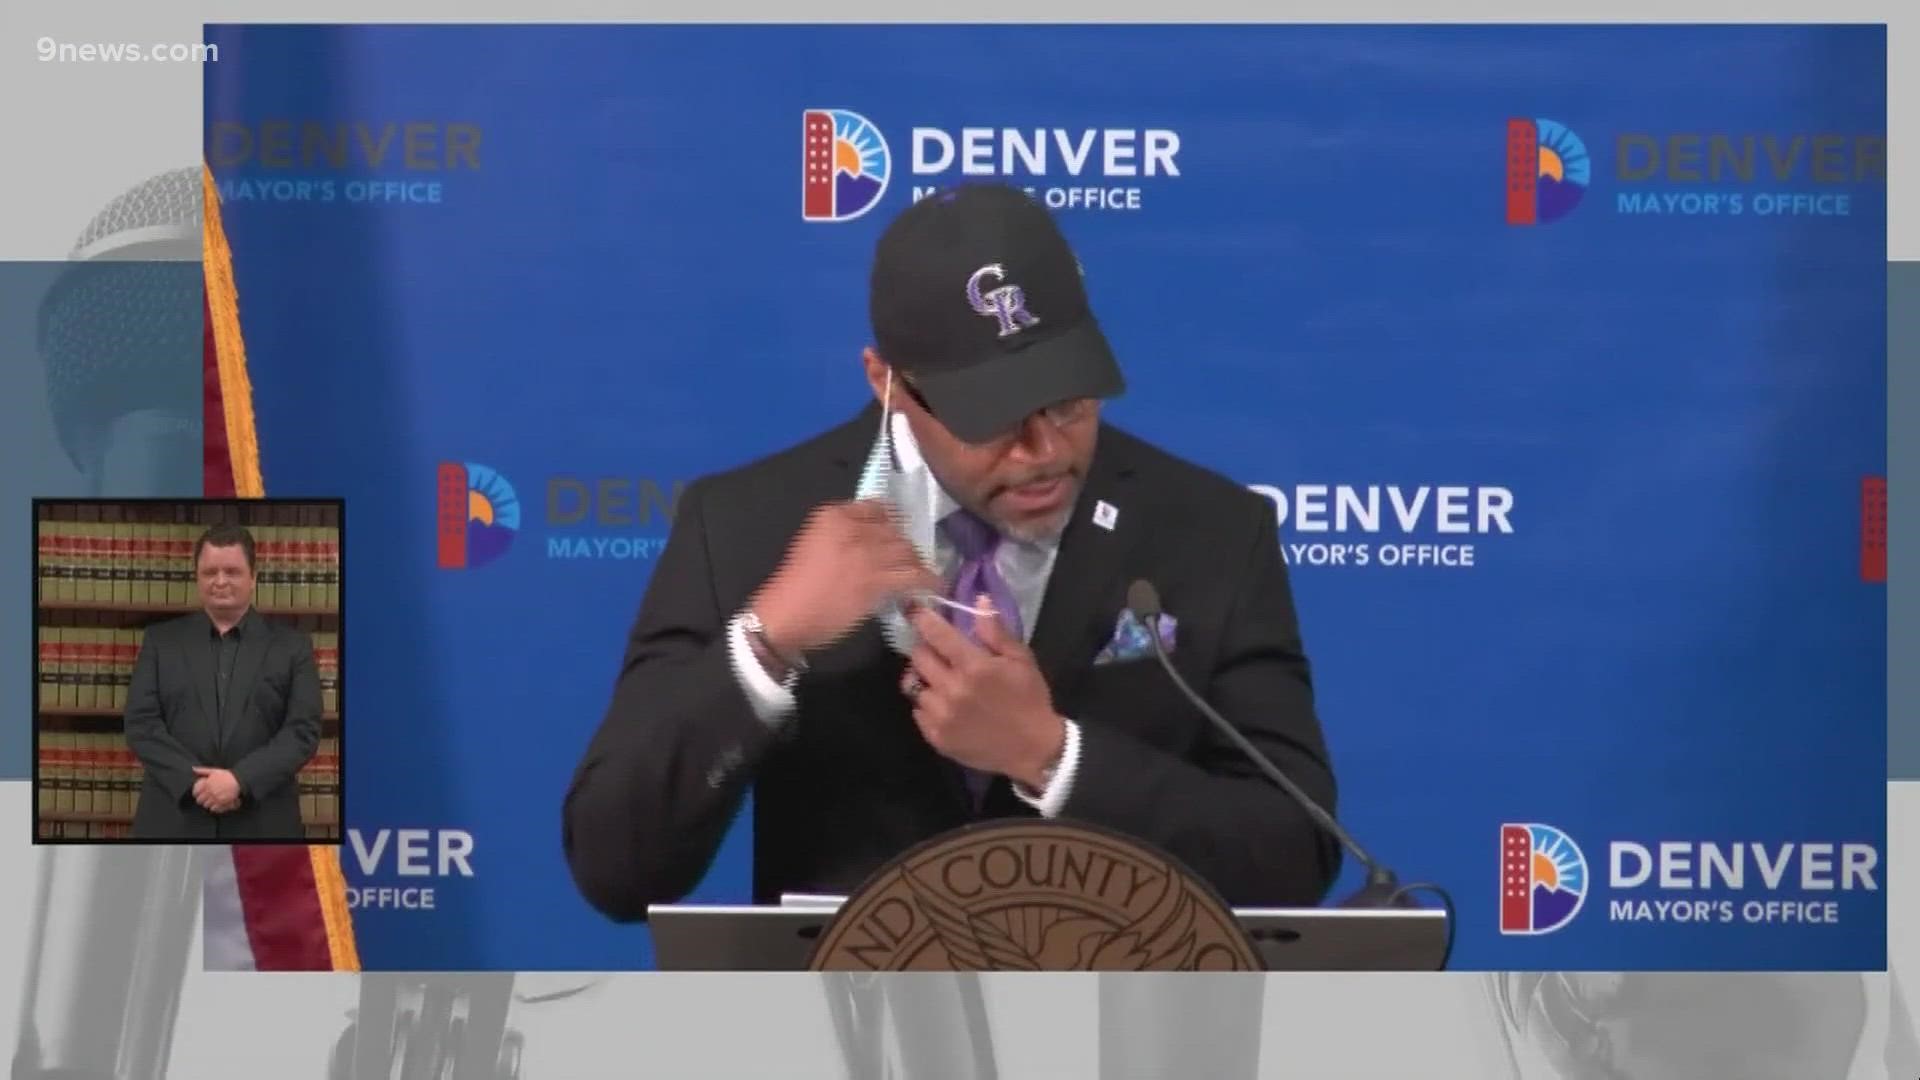 Denver's mayor and Colorado's governor said they expect a full stadium for the July 13 game at Coors Field.